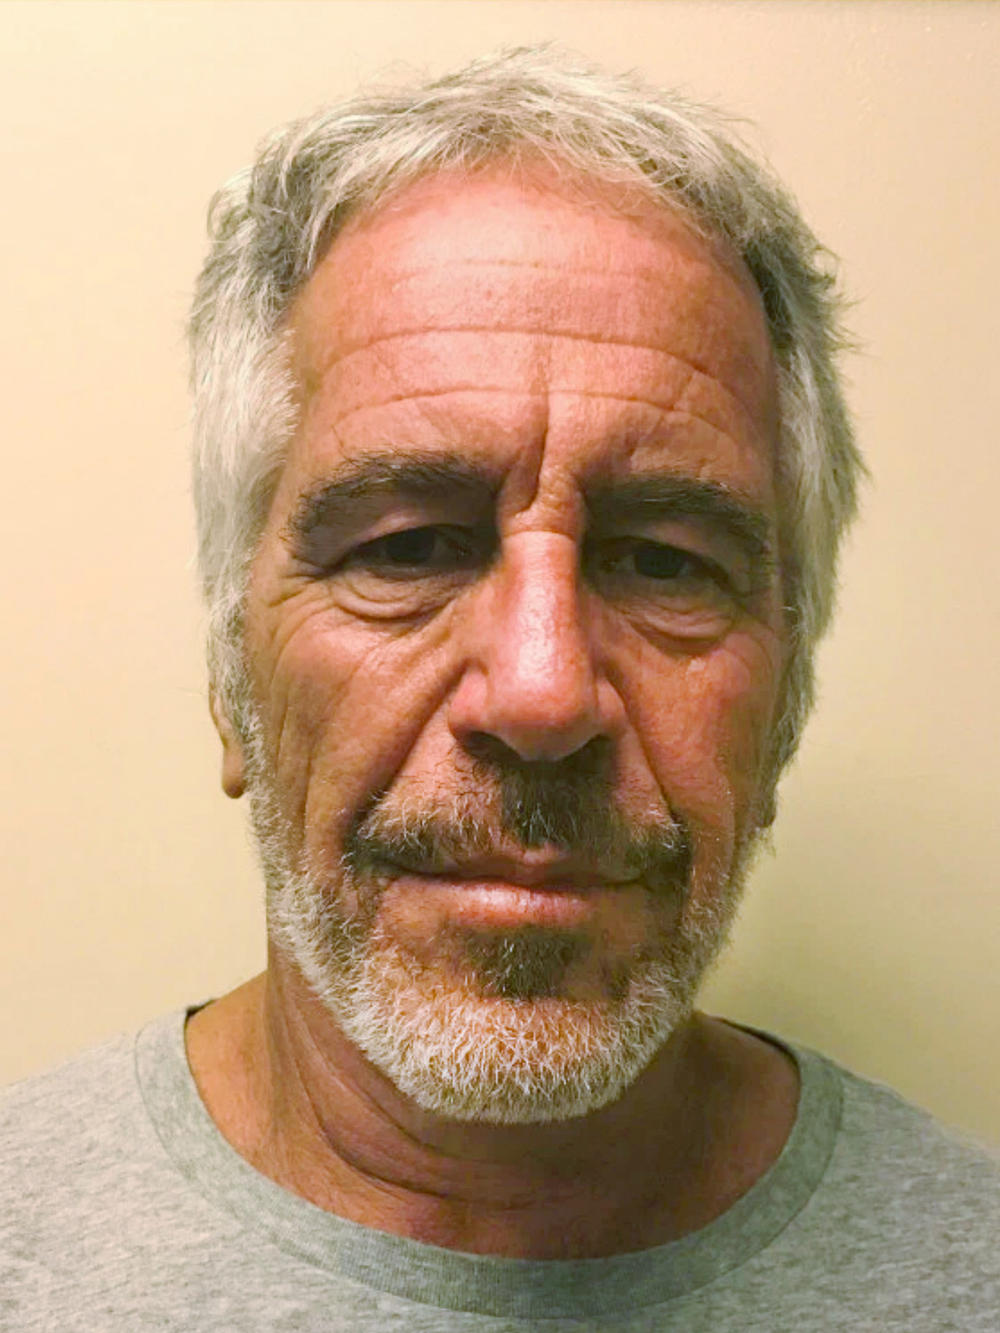 This March 28, 2017, image provided by the New York State Sex Offender Registry shows Jeffrey Epstein.